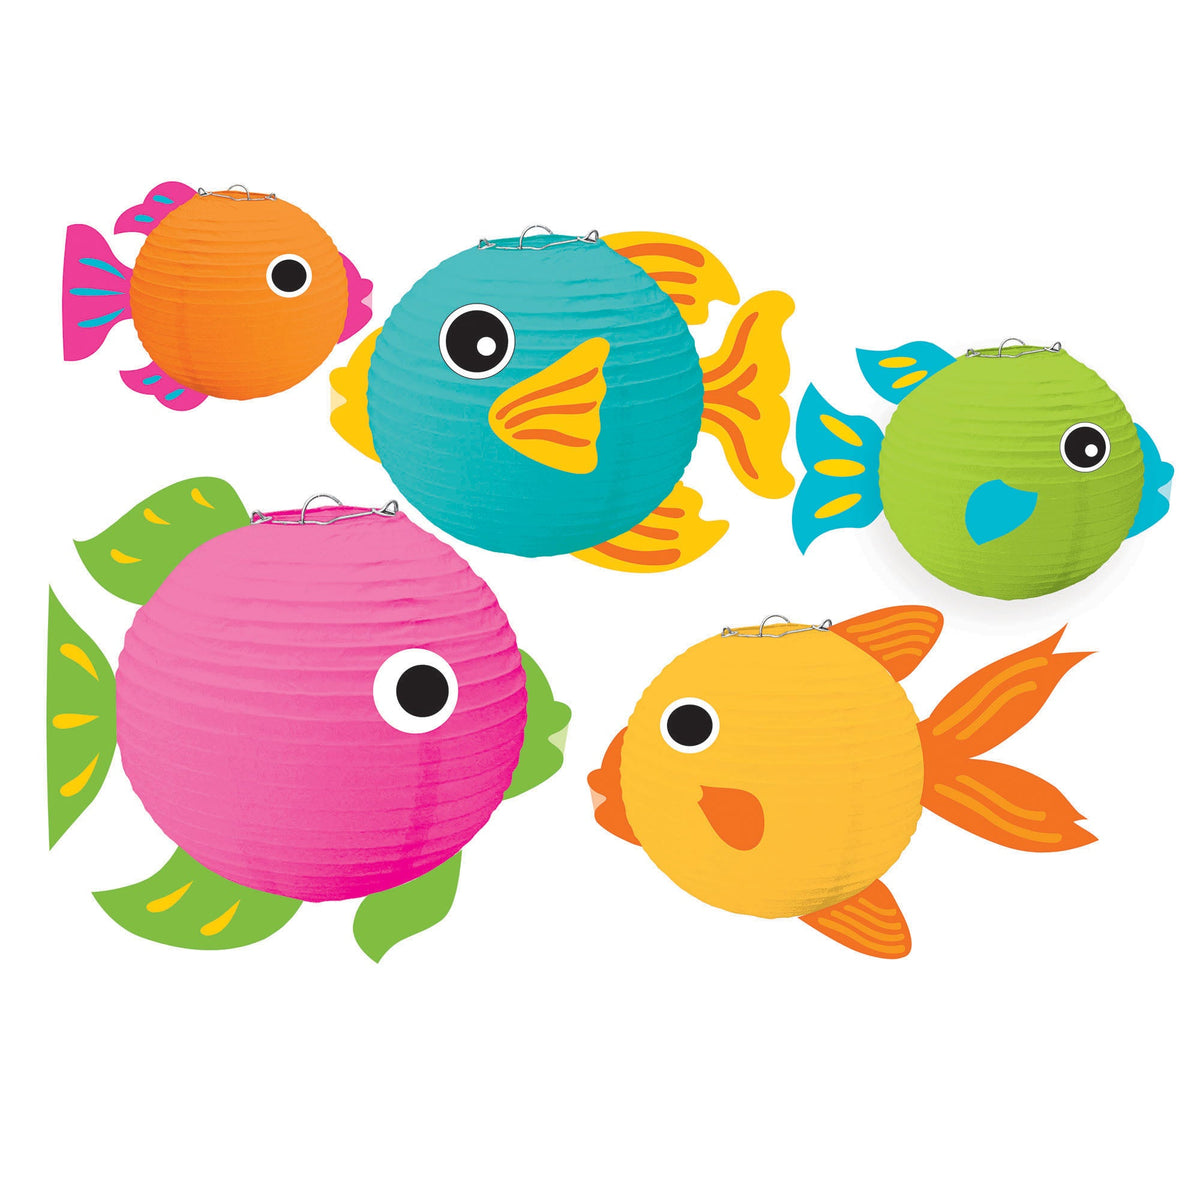 Fish Lanterns With Add Ons assoted sizes 5 3/4", 7 3/4", 9 1/2"